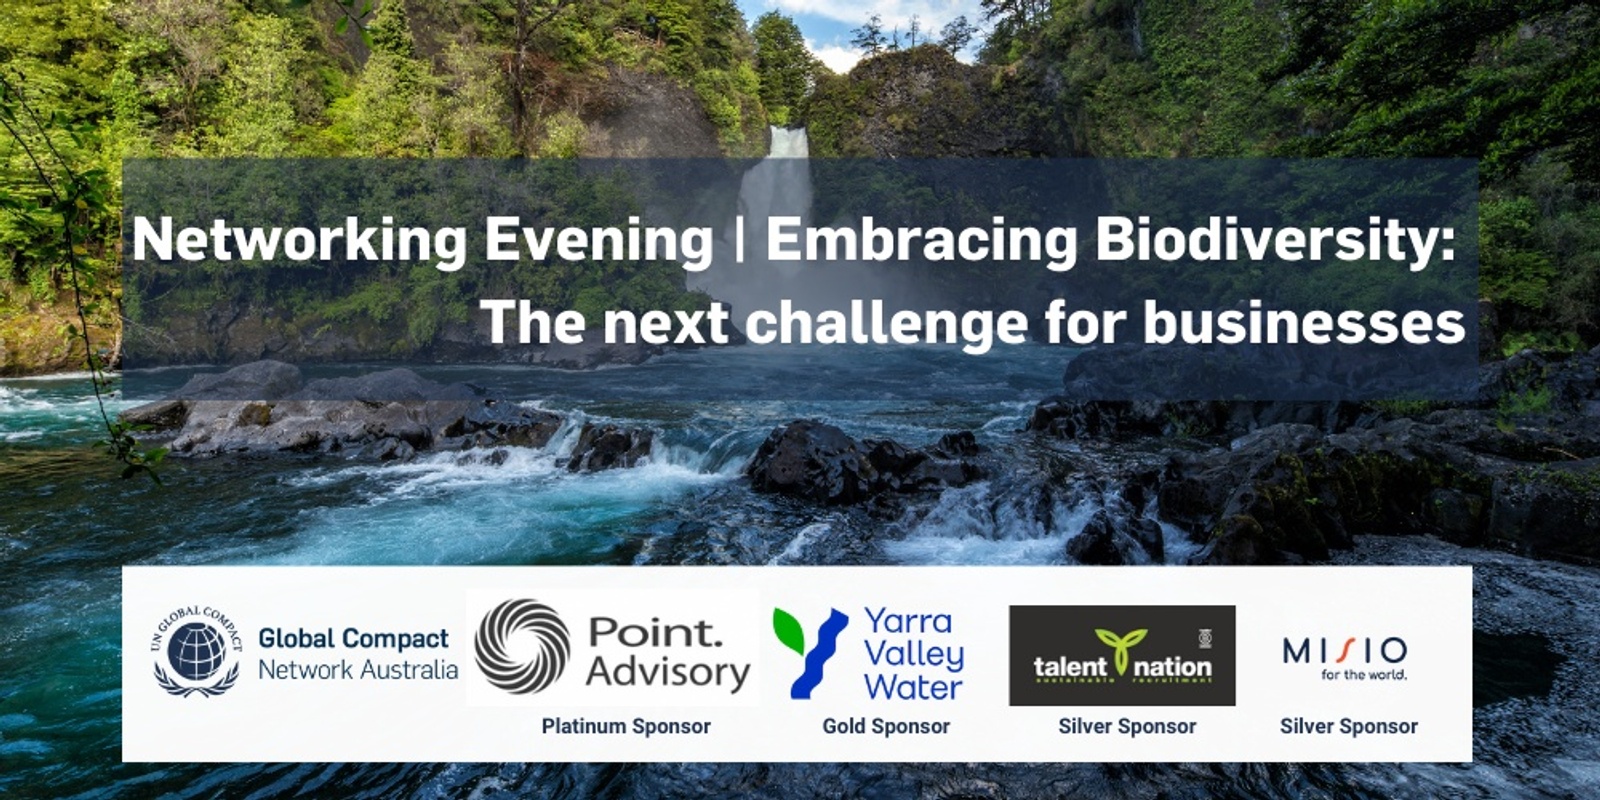 UN Global Compact Network Australia Networking Evening | Embracing Biodiversity: The next challenge for businesses